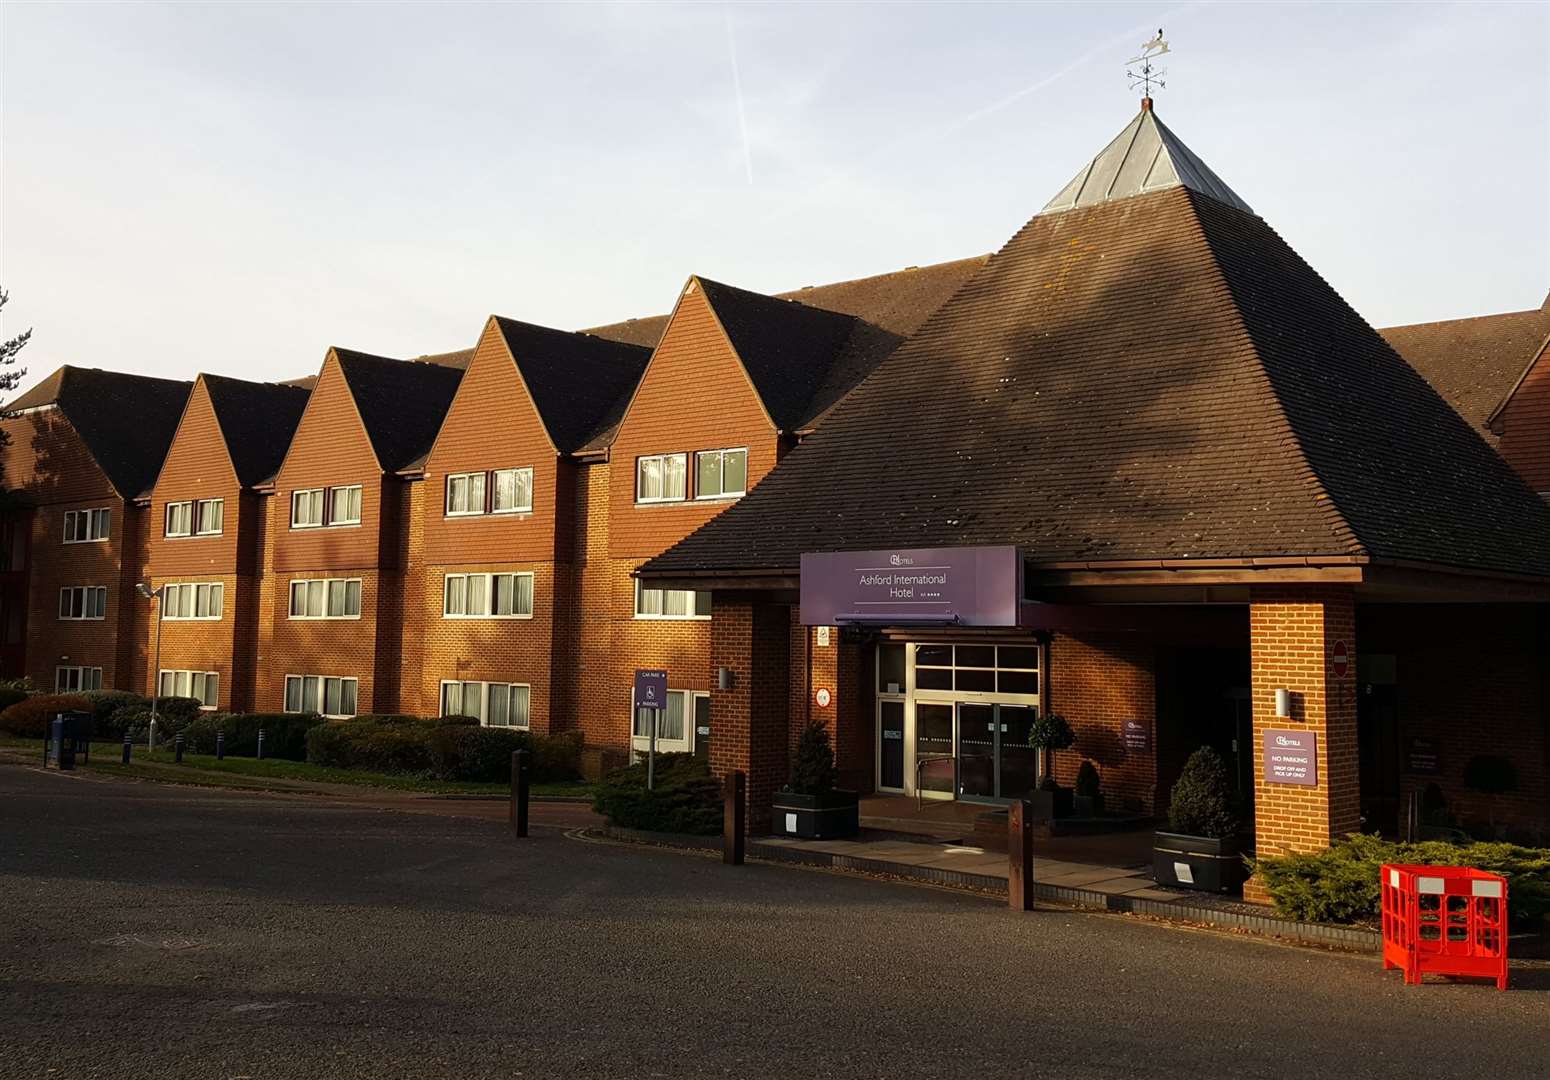 The Ashford International Hotel could be set for a change of ownership